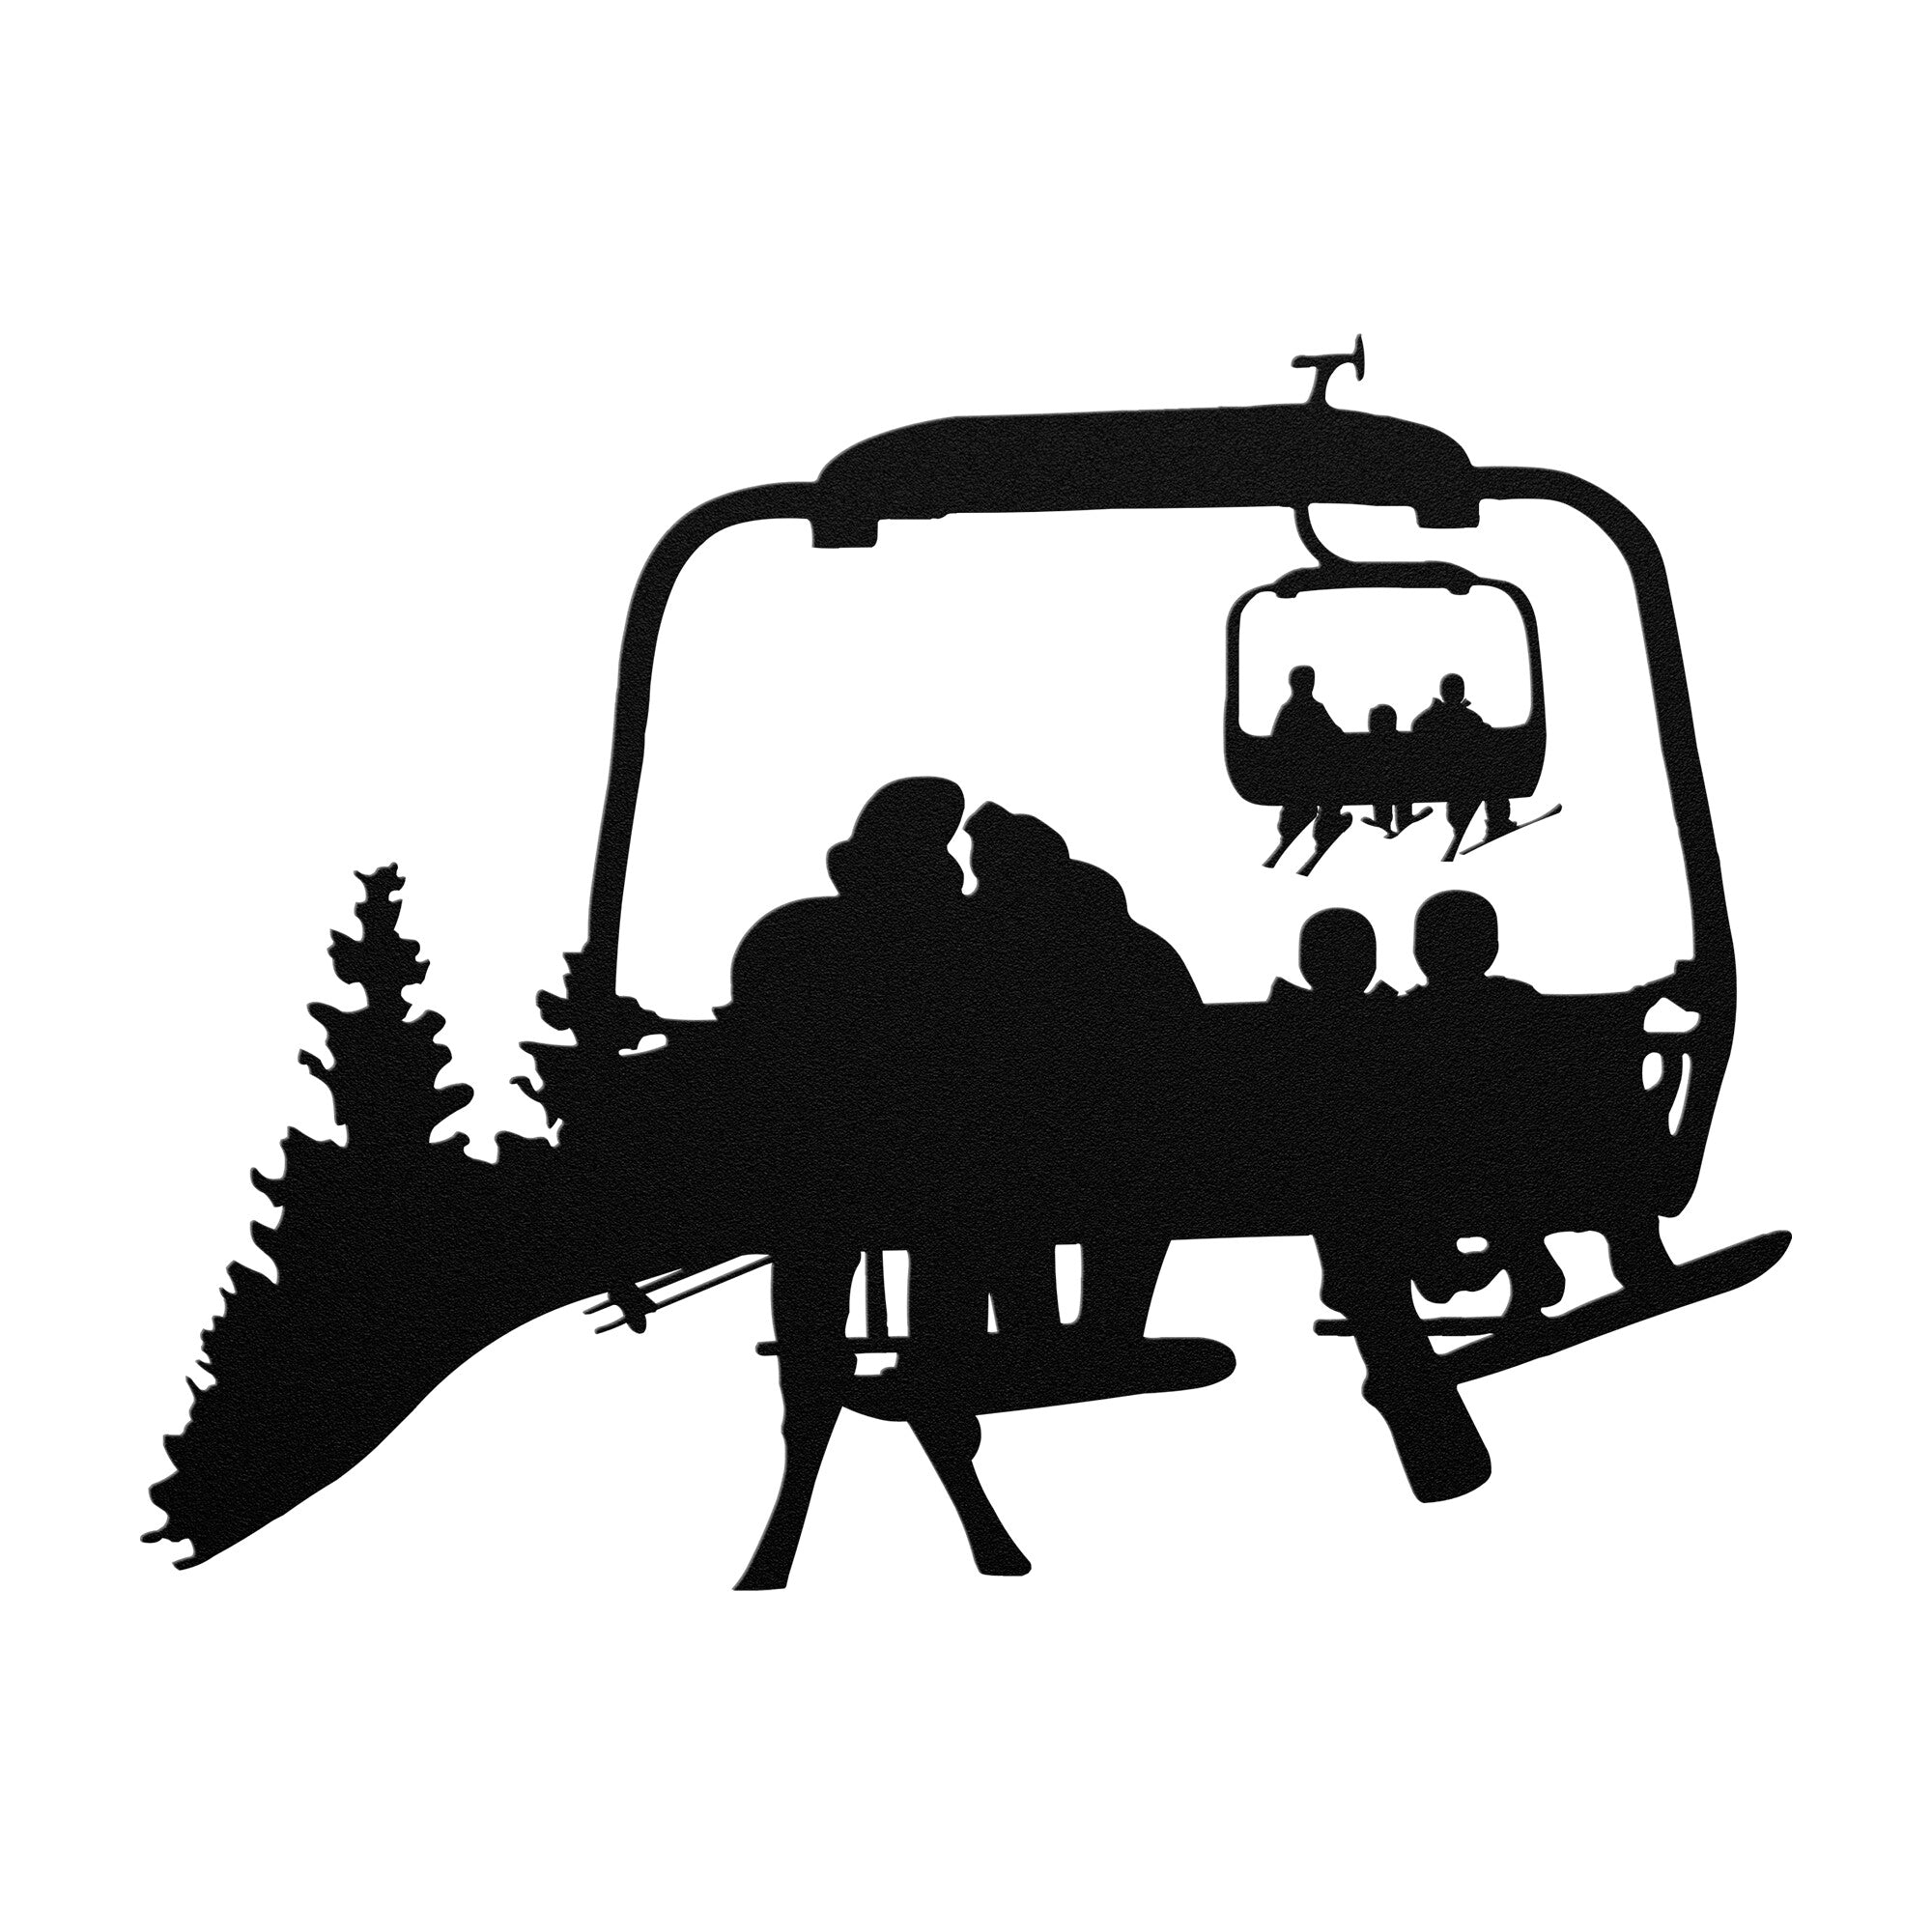 PERSONALIZED CHAIRLIFT SKI & SNOWBOARD FAMILY METAL WALL ART, 1 SKIING DAD, 1 SNOWBOARDING MOM, 2 SNOWBOARDING CHILDREN (🇺🇸 MADE IN THE USA)